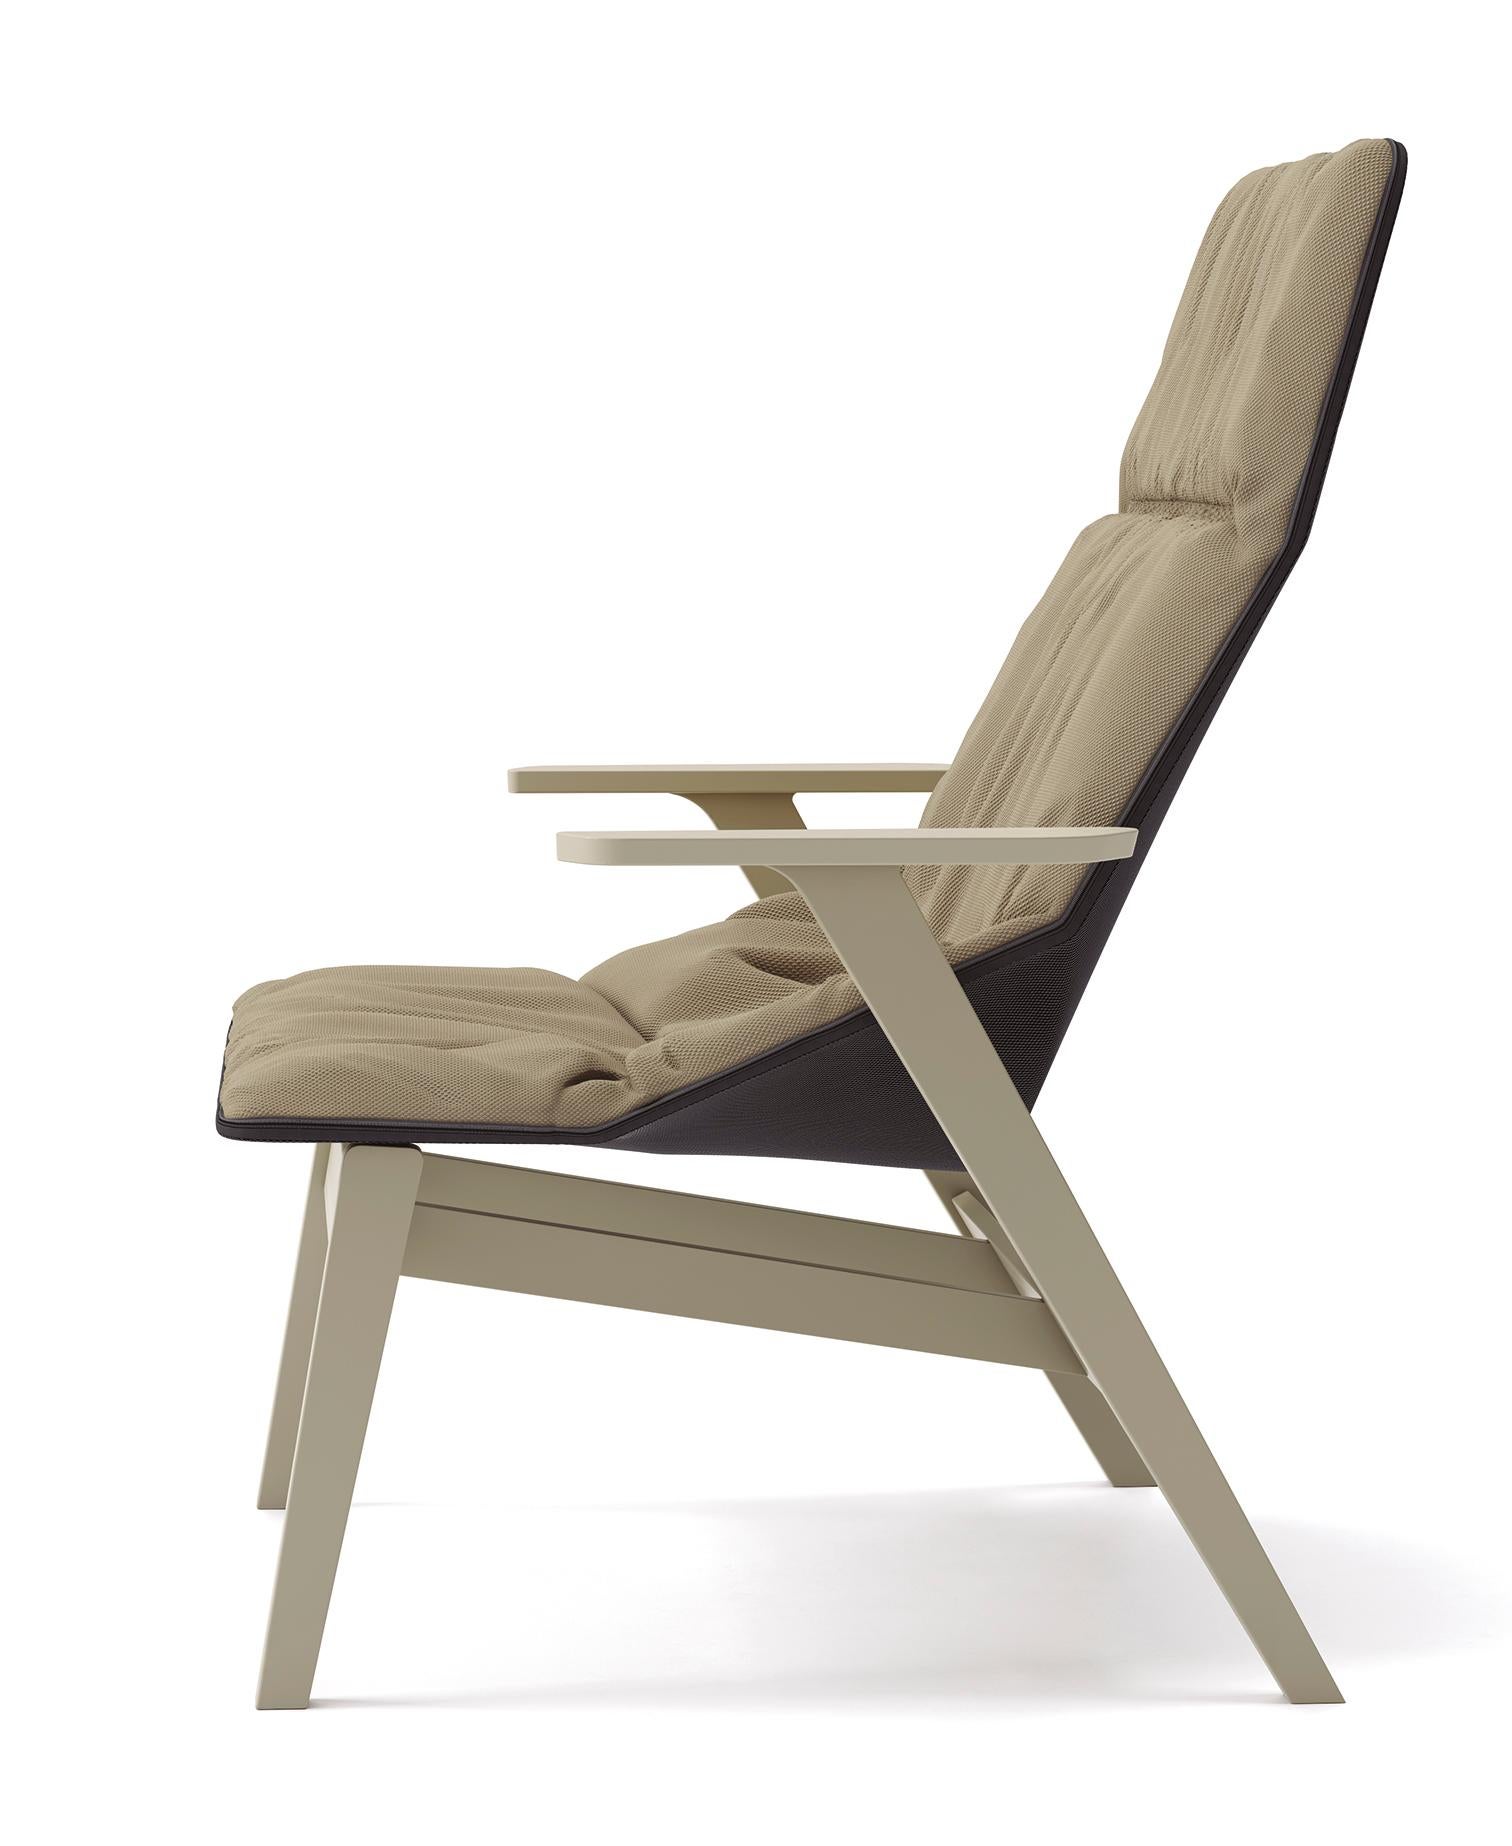 Jean-Marie Massaud, Ace Lounge Chair with Arms, Viccarbe, 2009 For Sale 1